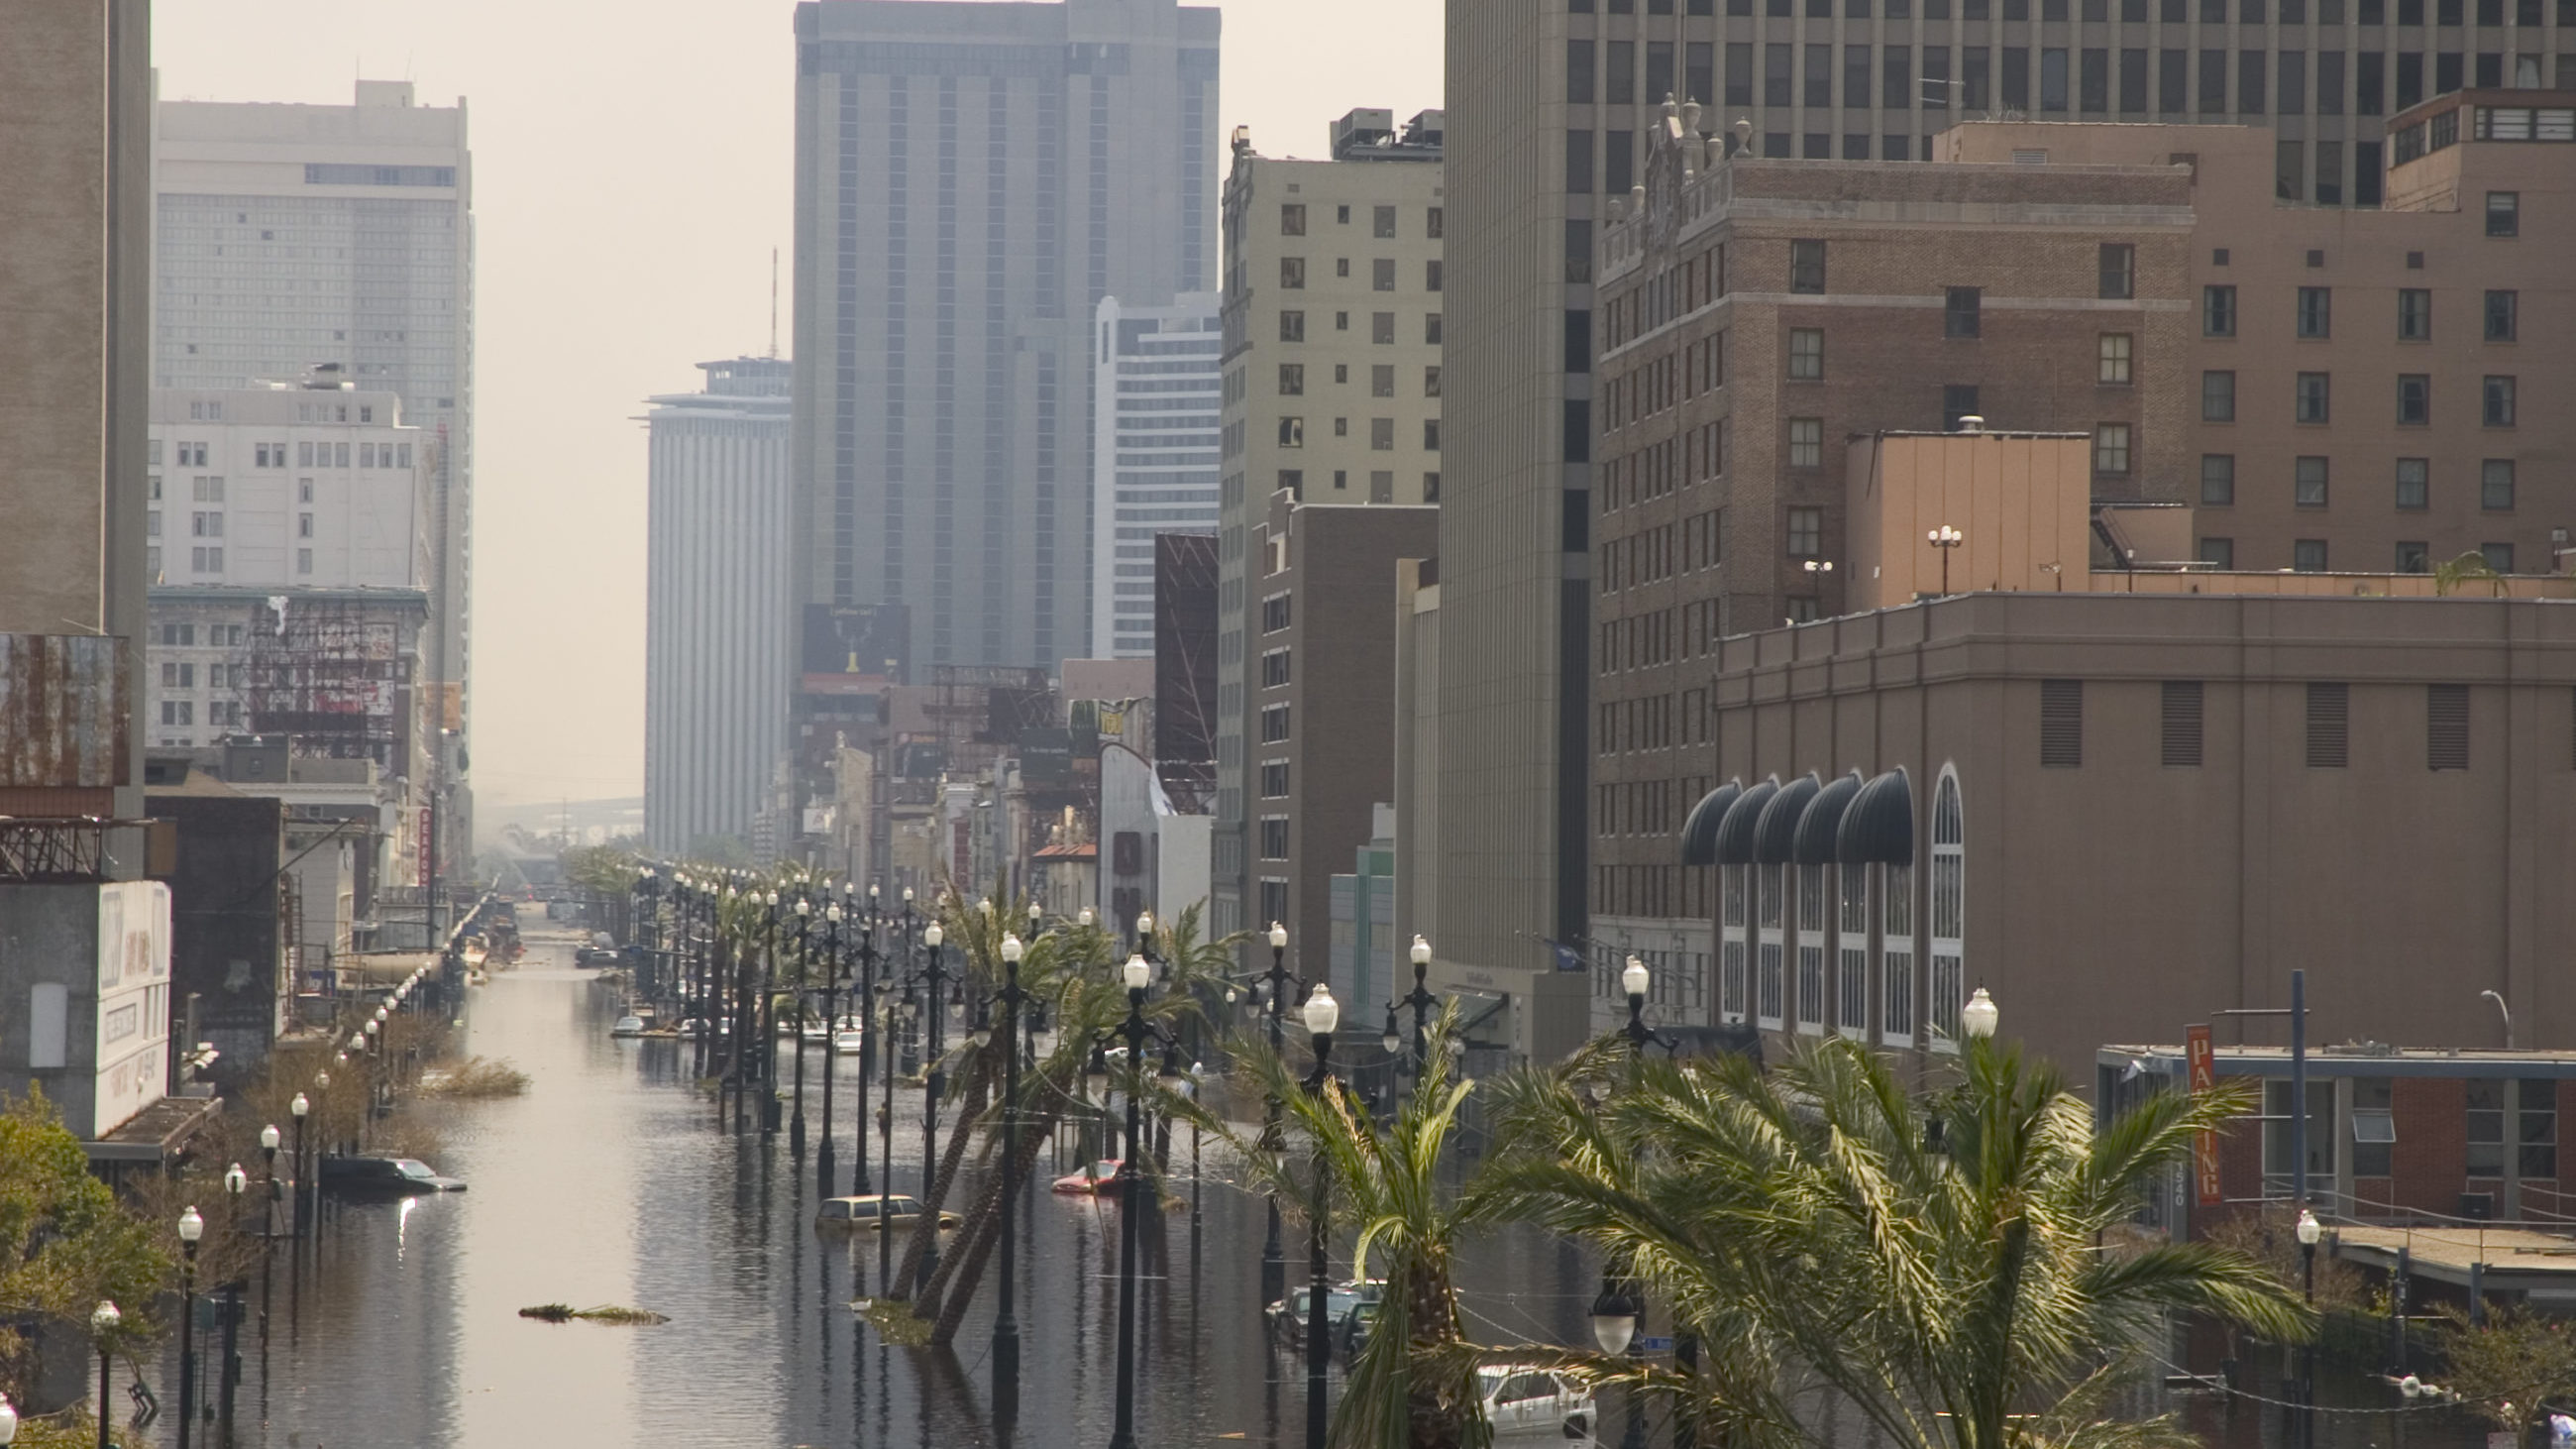 After Hurricane Katrina  devastated New Orleans, city officials have been looking into a new way to prevent flooding by embracing the landscape's natural waterways.